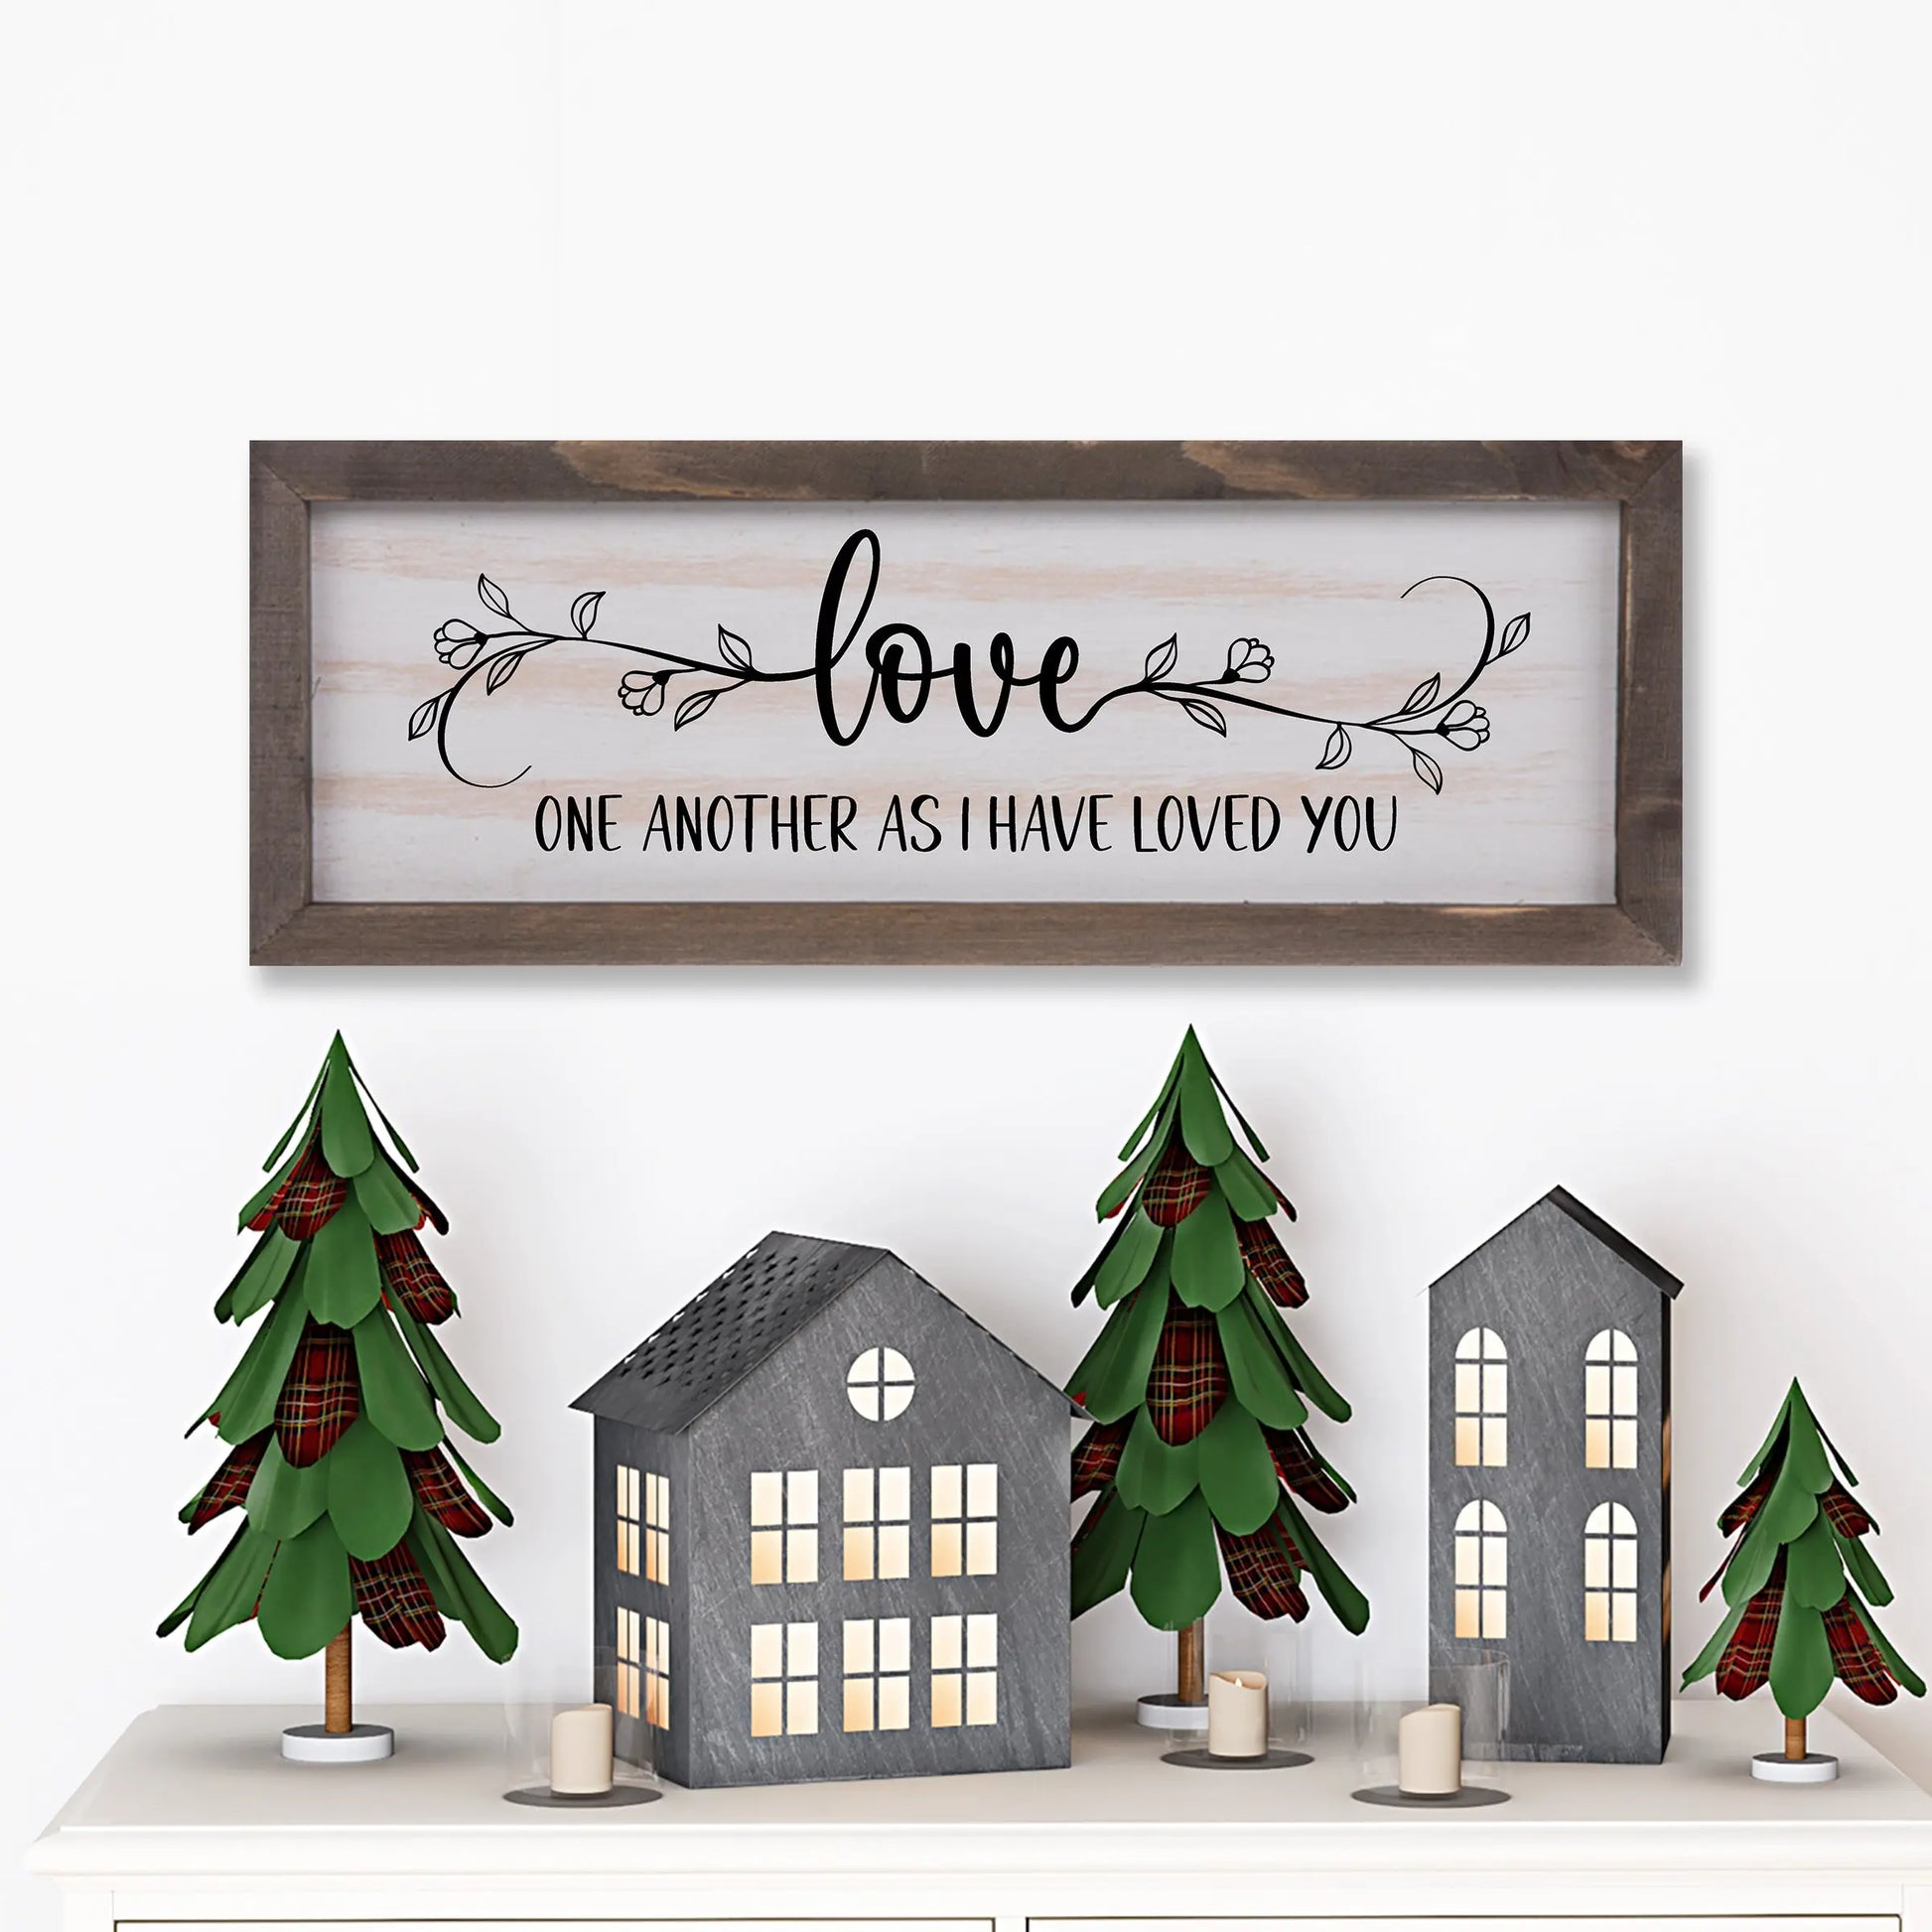 Copy of With God All Things Are Possible Rustic Whitewash Wood Frame Scripture Sign | Matthew 19:26 amazingfaithdesigns